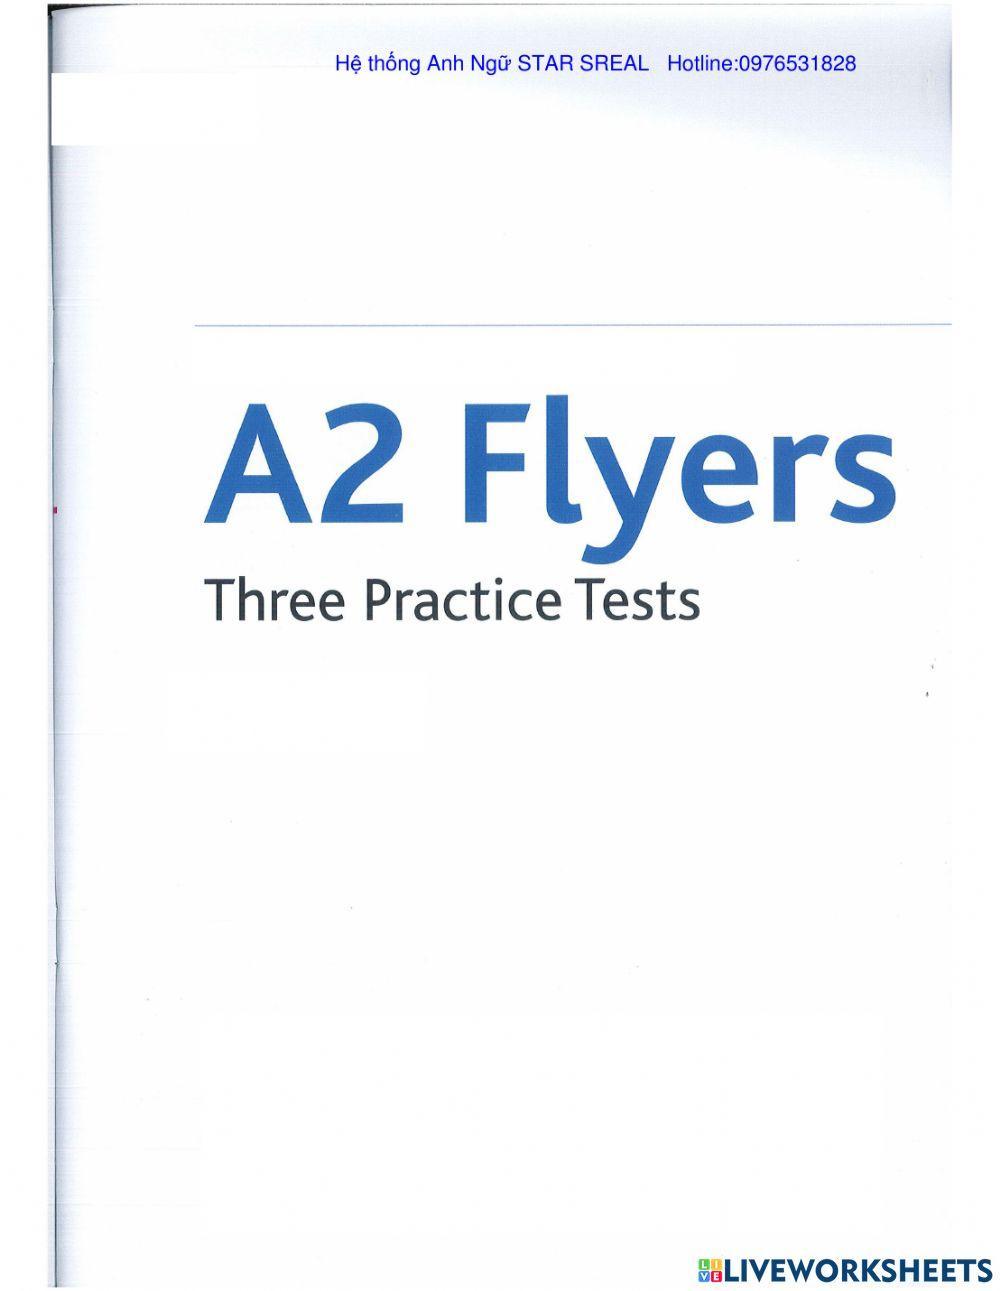 A2 Flyers practices test Reading and Writing part 7